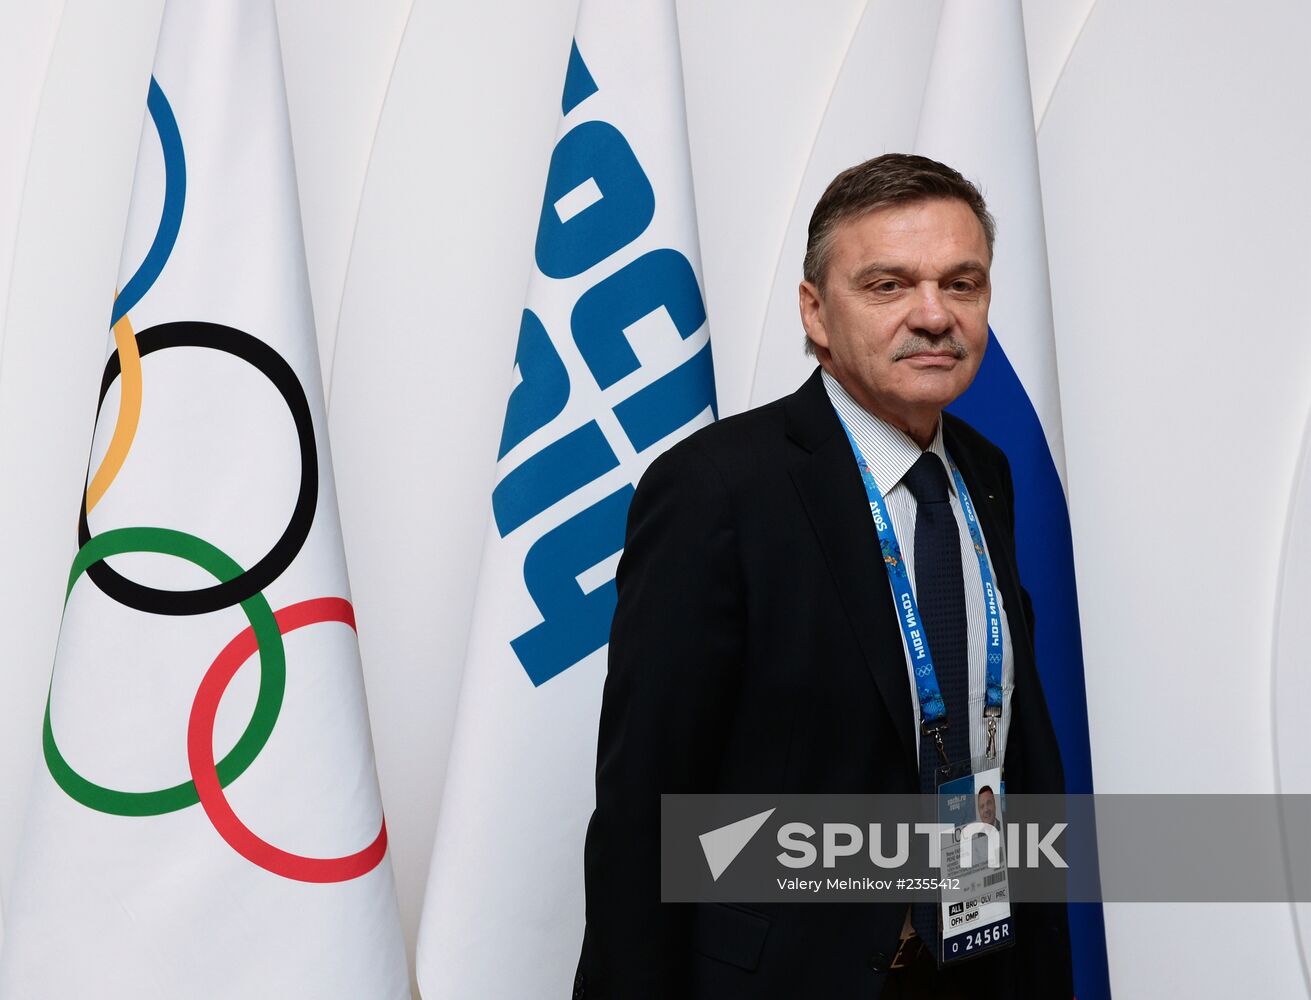 Meeting of International Olympic Committee's Executive Board